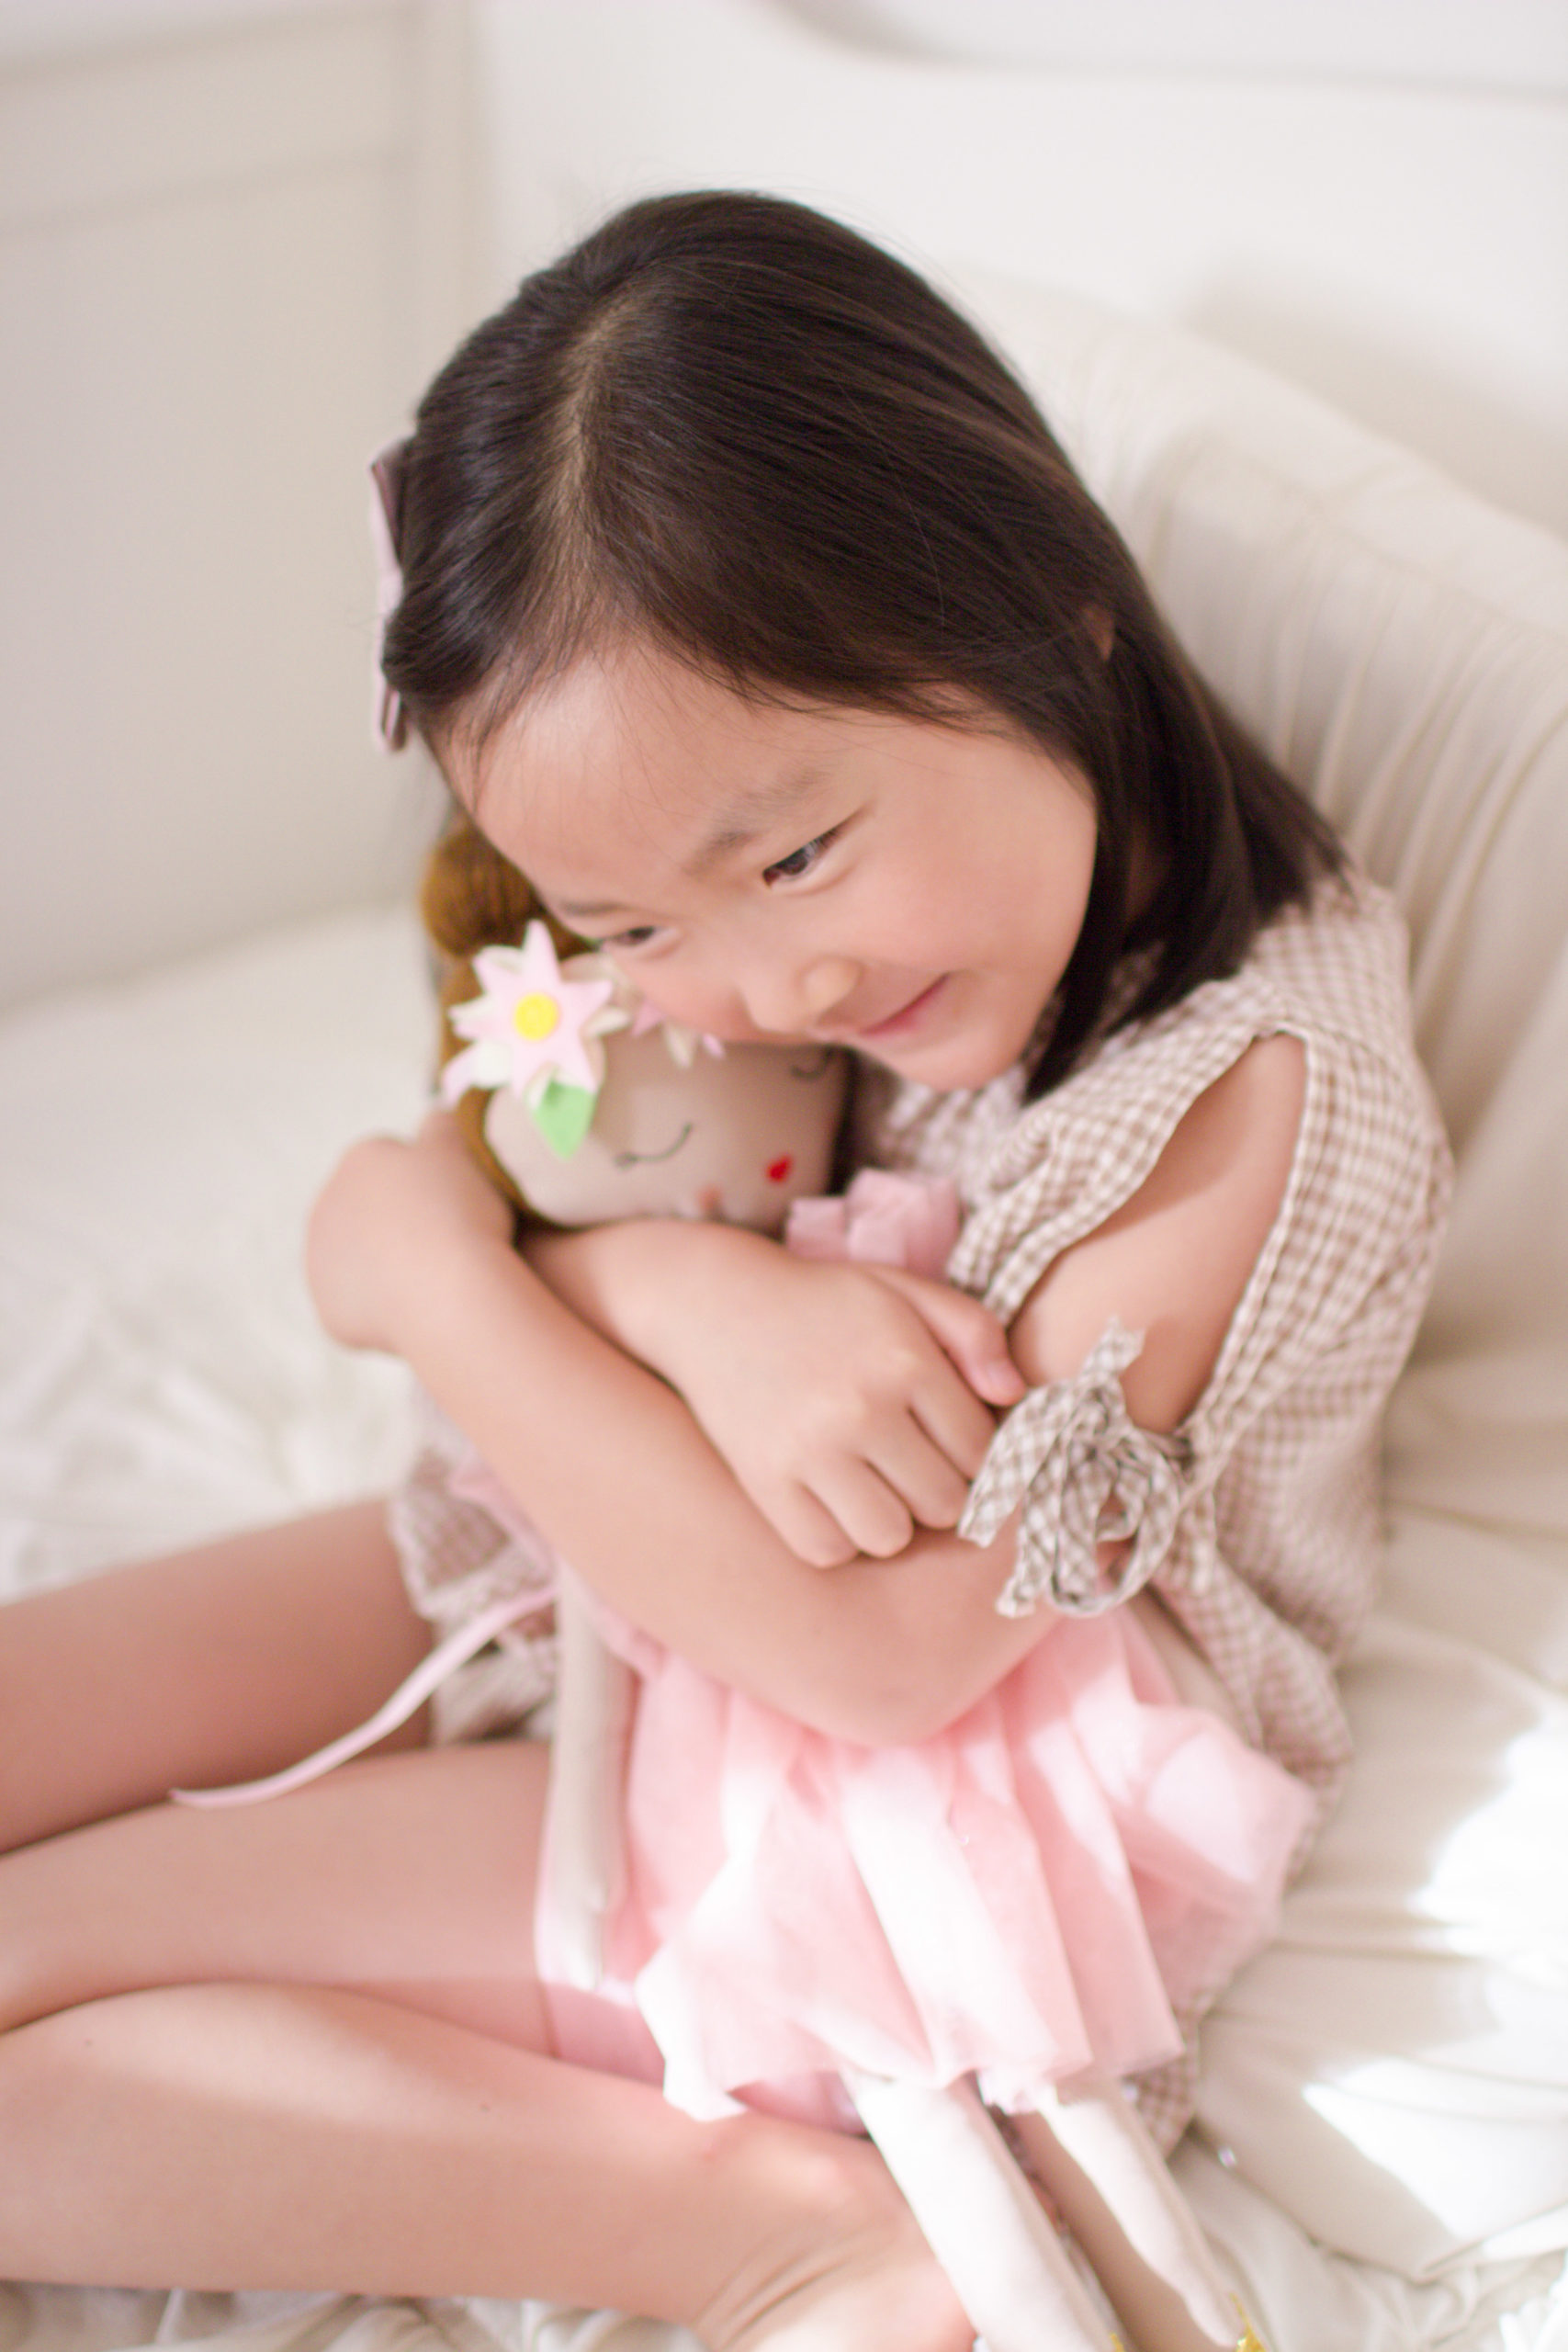 A little girl is embracing her doll, who is dark skinned. Photo taken by Tiffany Chi Photography.